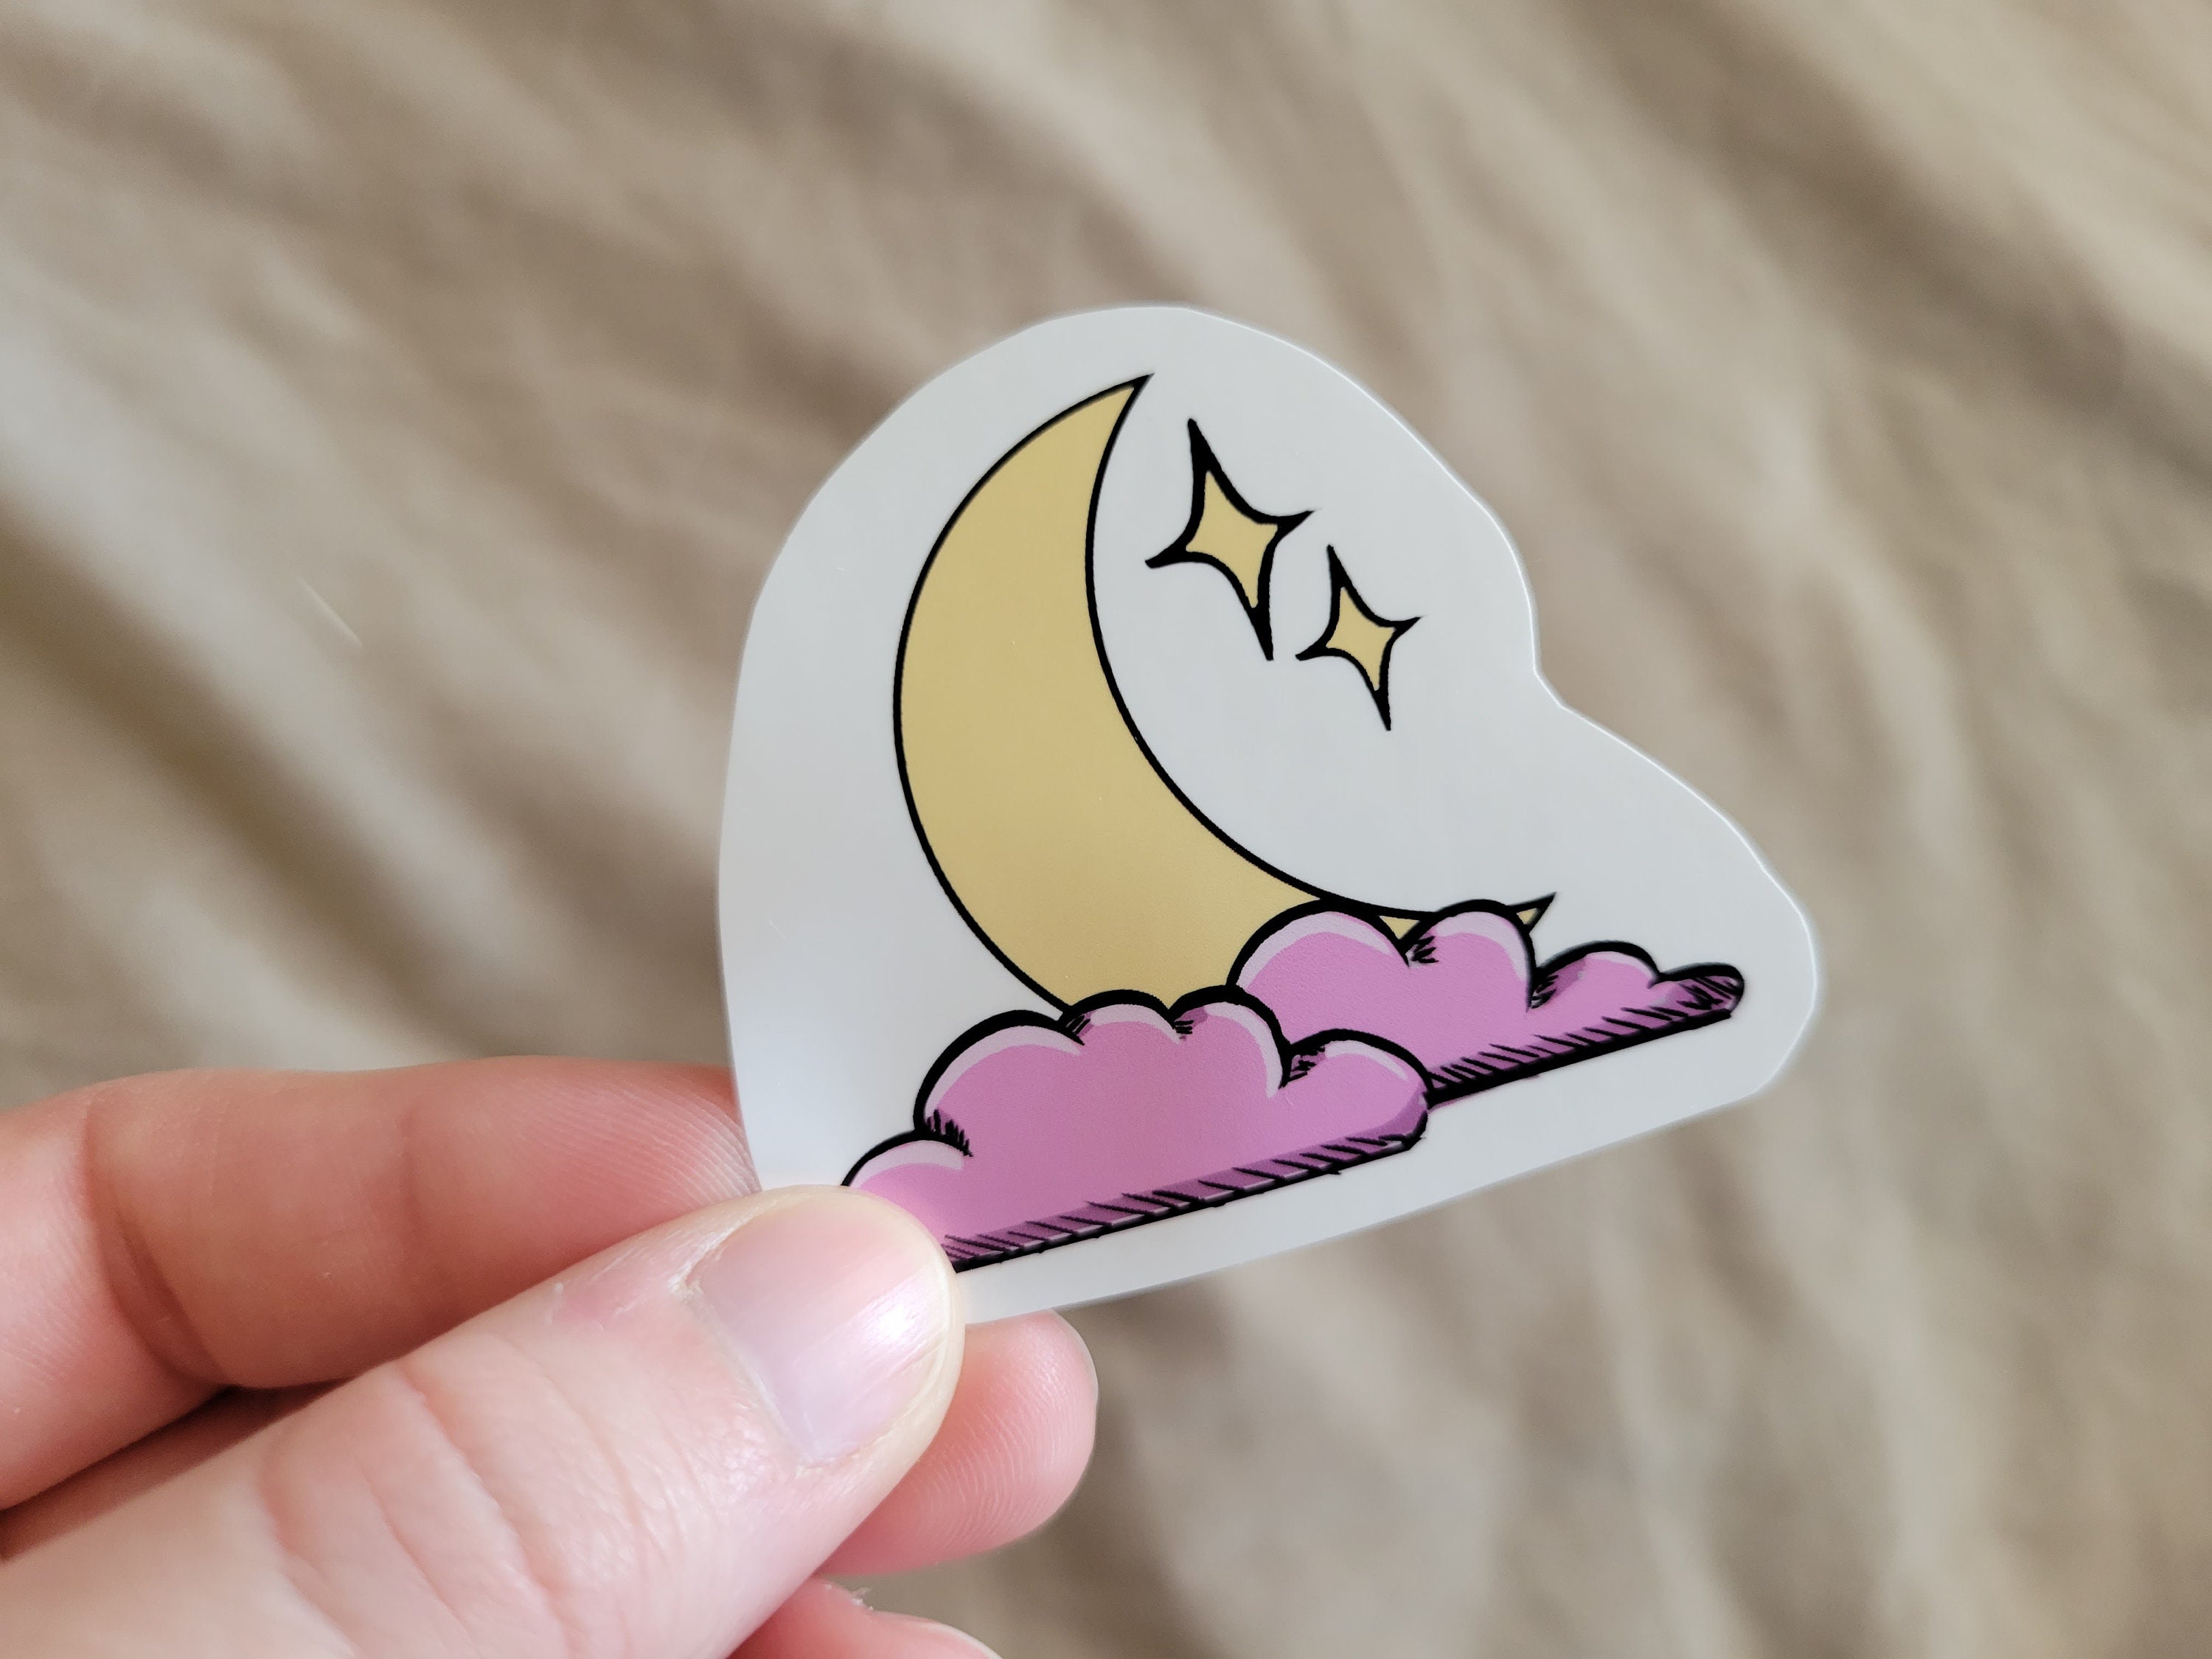 Clouds Moon Sticker - Clouds Moon Transparent - Discover & Share GIFs